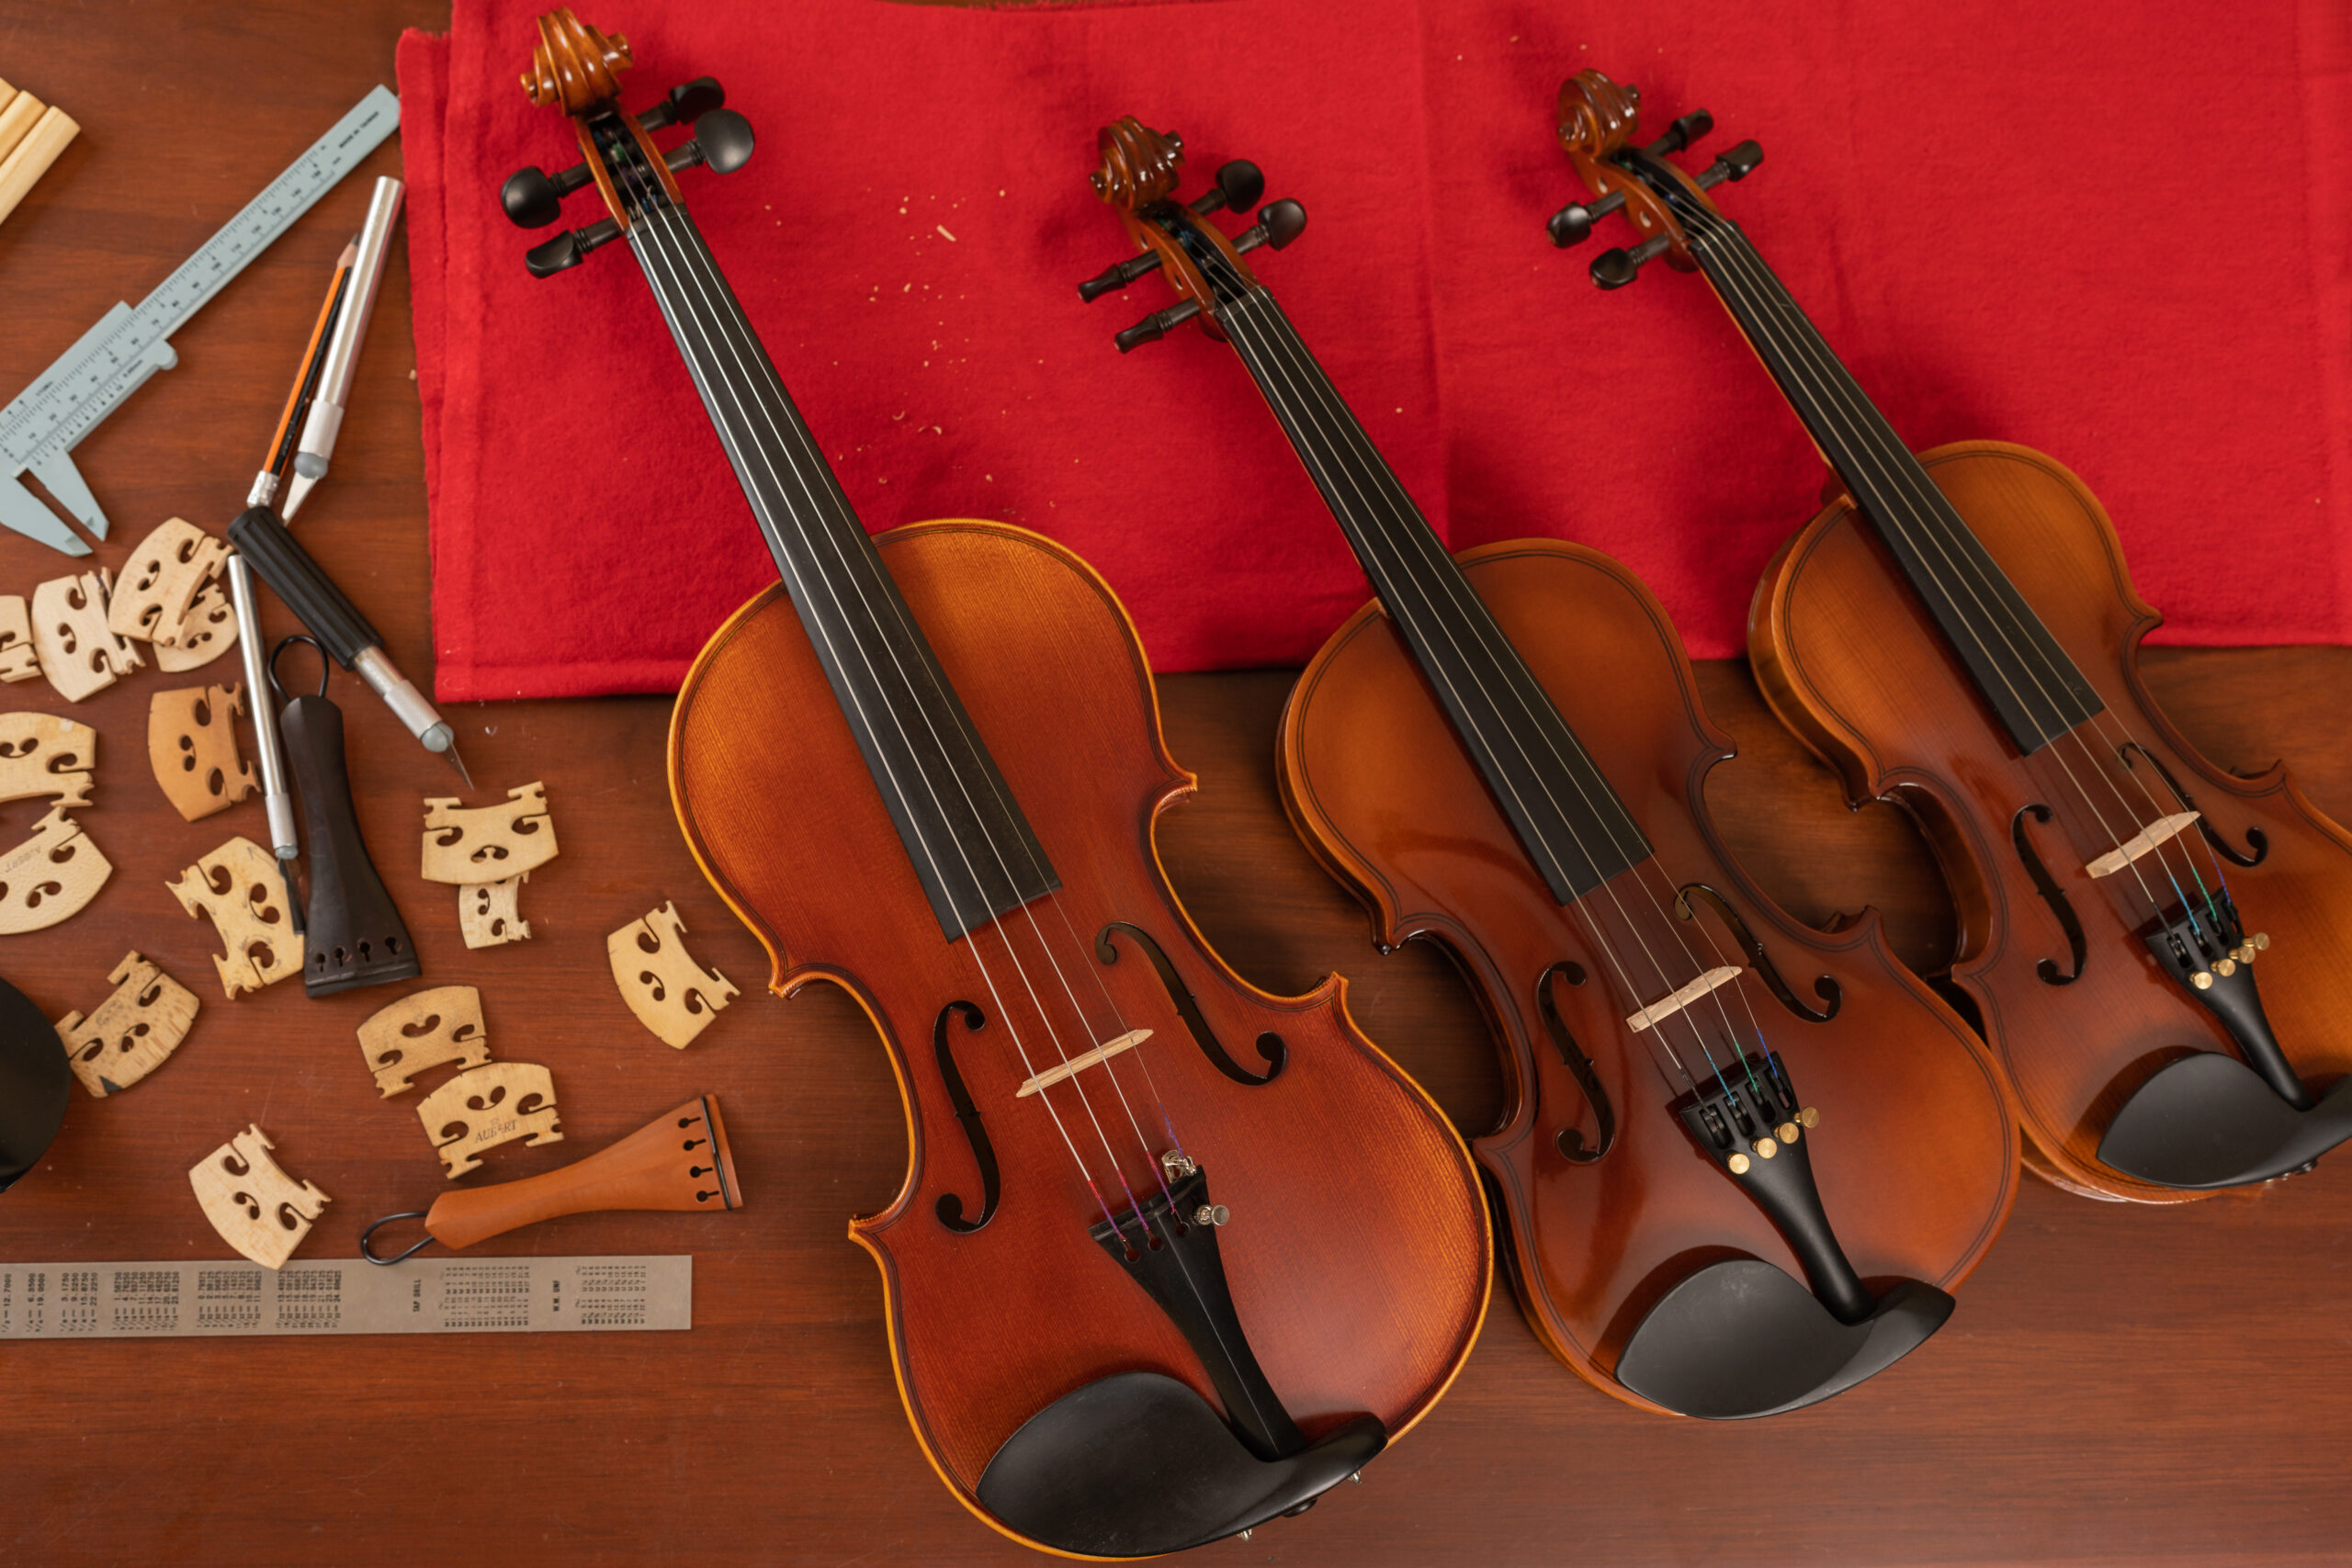 Violin Rental and How to Choose the Right Size Violin